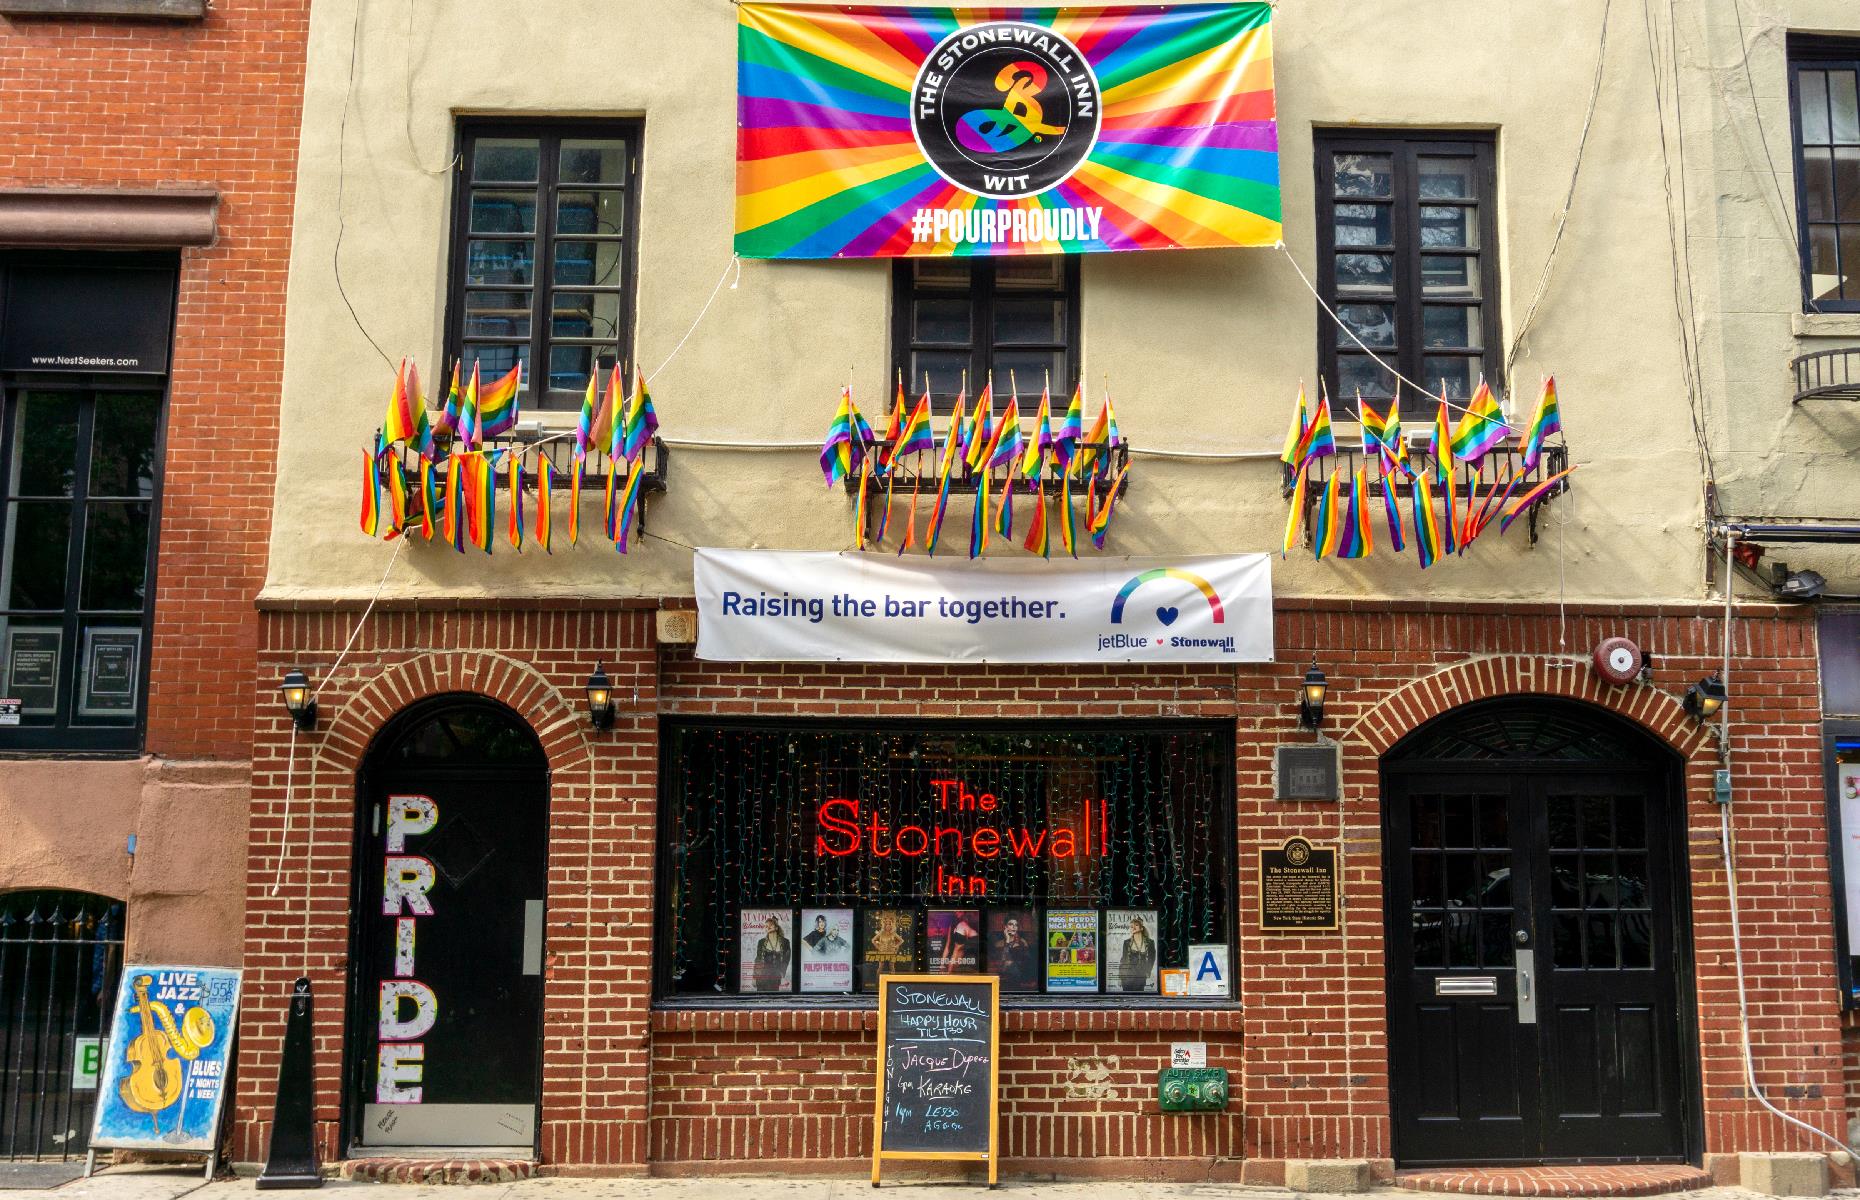 <p>The Stonewall Uprising was a pivotal movement for the LGBTQ+ community in the late 1960s. In the small hours of June 28, 1969, police raided Stonewall Inn, a gay bar in New York City’s Greenwich Village. The raid was met with violent opposition from punters and gathering supporting crowds, and became a symbol of LGBTQ+ resistance, triggering further demonstrations and parades across New York and beyond. The Stonewall Inn remains a working bar and has been protected as a National Monument since 2016.</p>